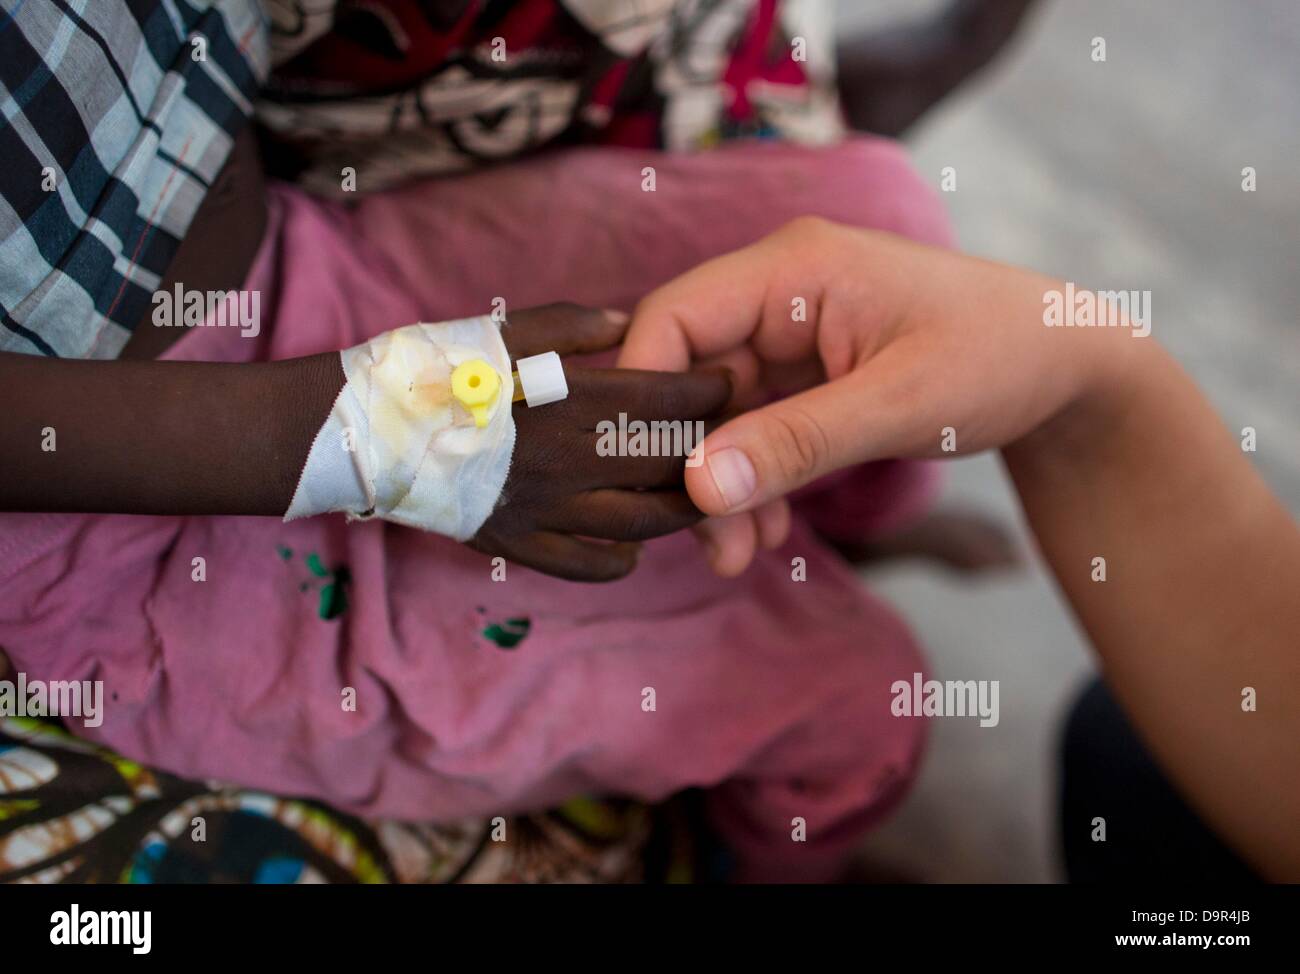 patients in MSF hospital in batangafo, Central African Republic Stock Photo